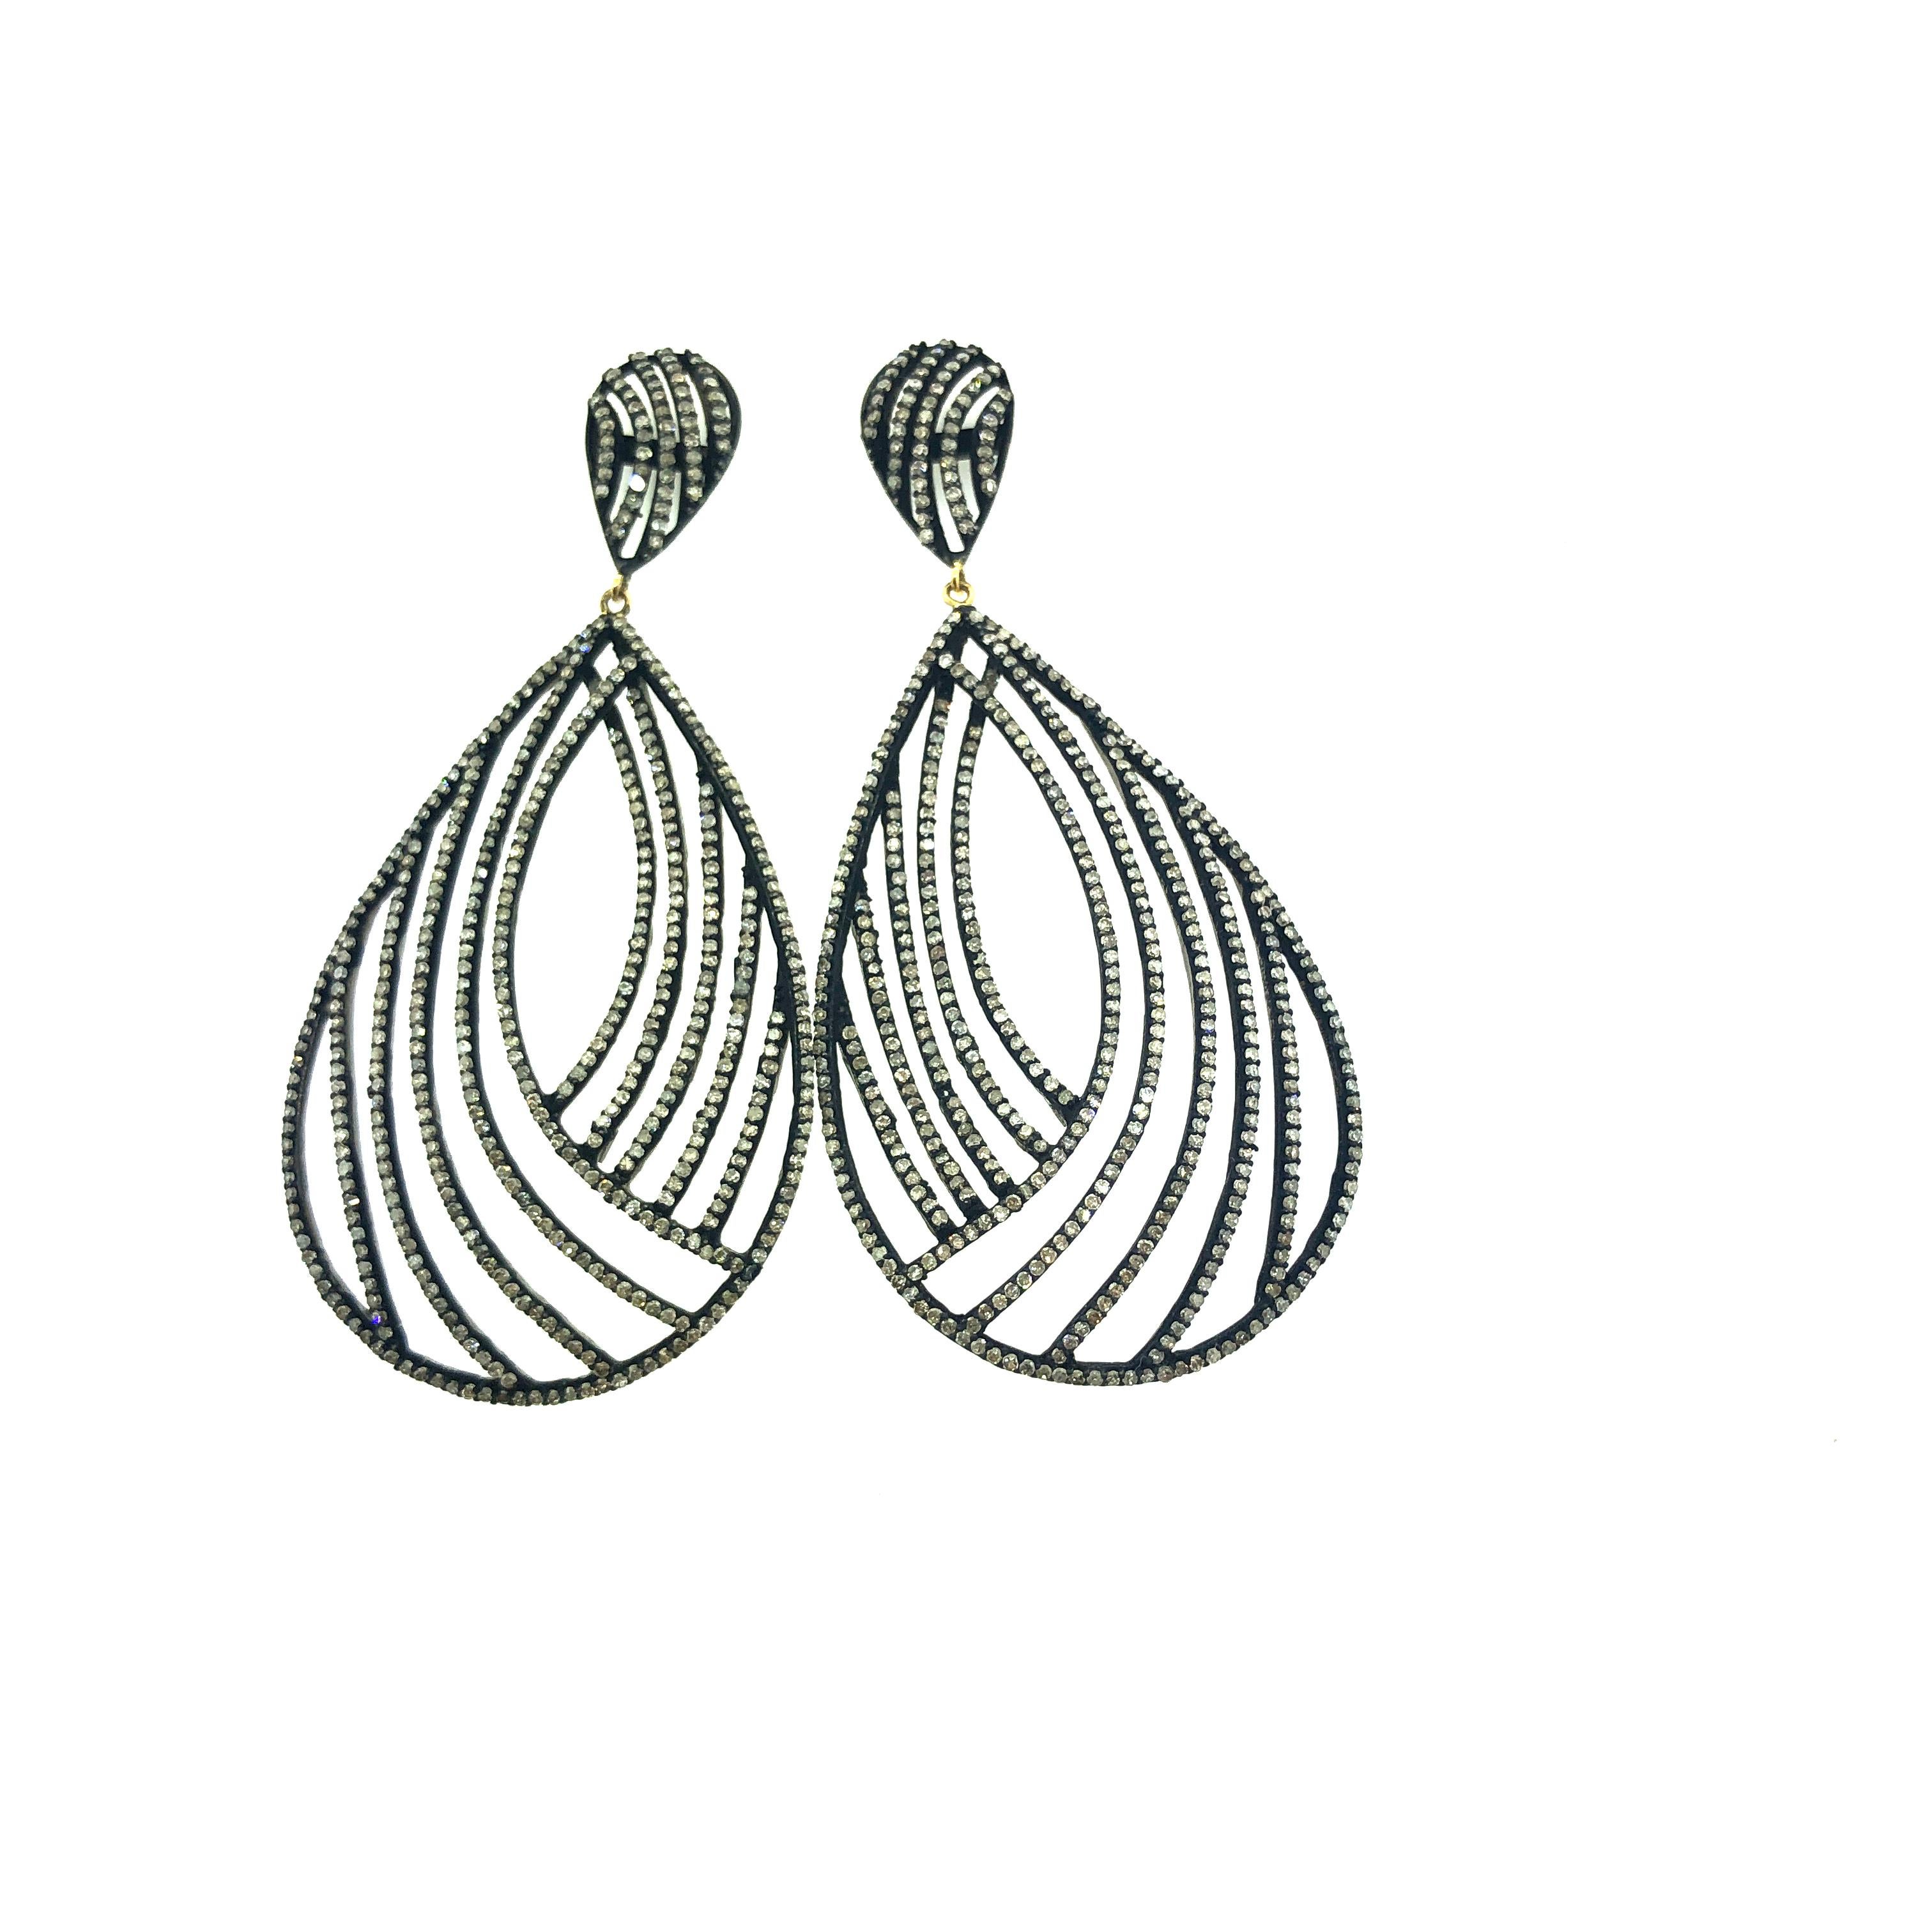 Contemporary 5.85 Carat Diamond Earring in Oxidized Sterling Silver, 14 Karat Gold For Sale